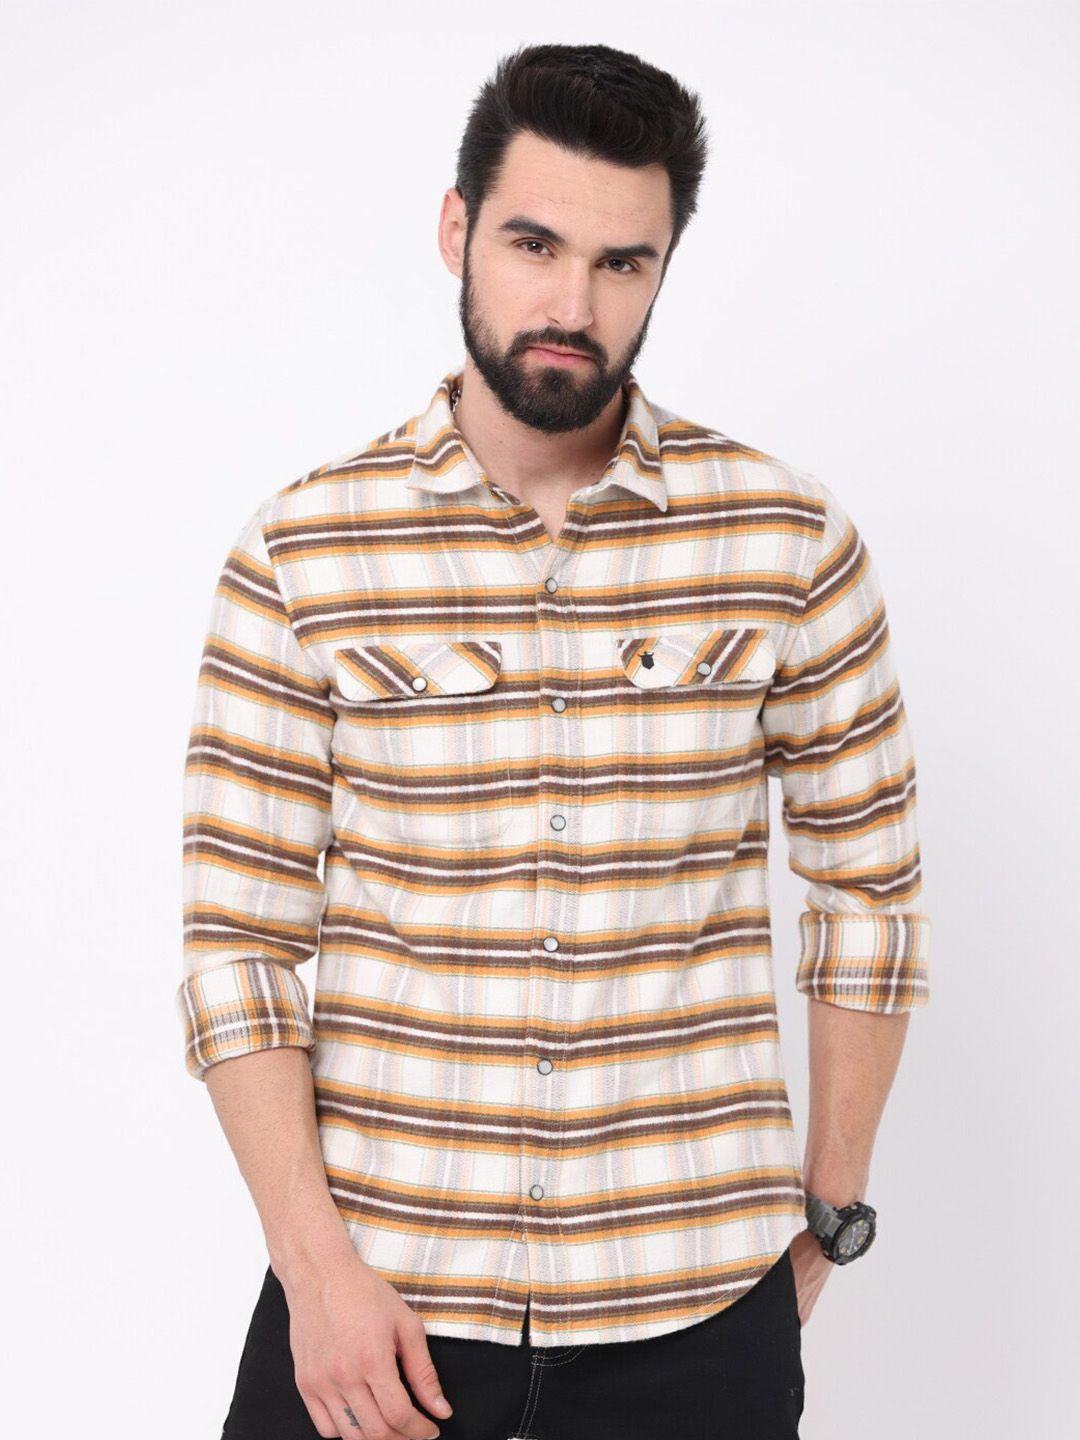 fly 69 premium slim fit horizontal striped pure cotton casual shirt